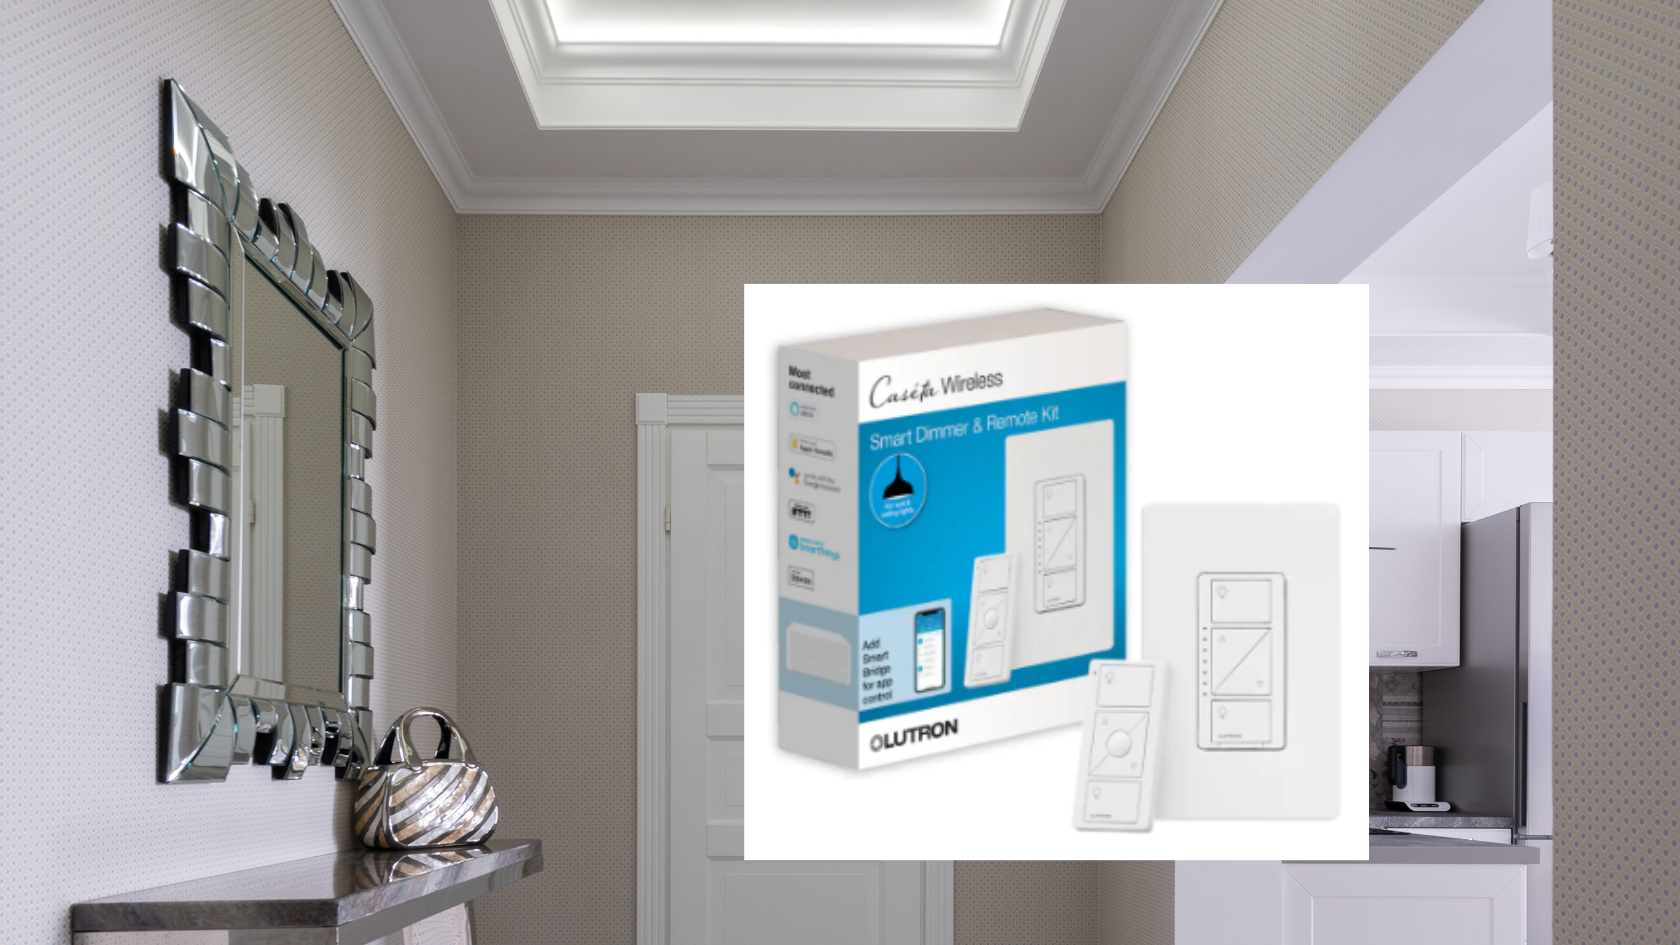 Caseta wireless ELV+ Dimmer smart switches have become a great cost-effective way to provide homeowners with a solution for dimmer switches or for adding more convenience and control over lighting options